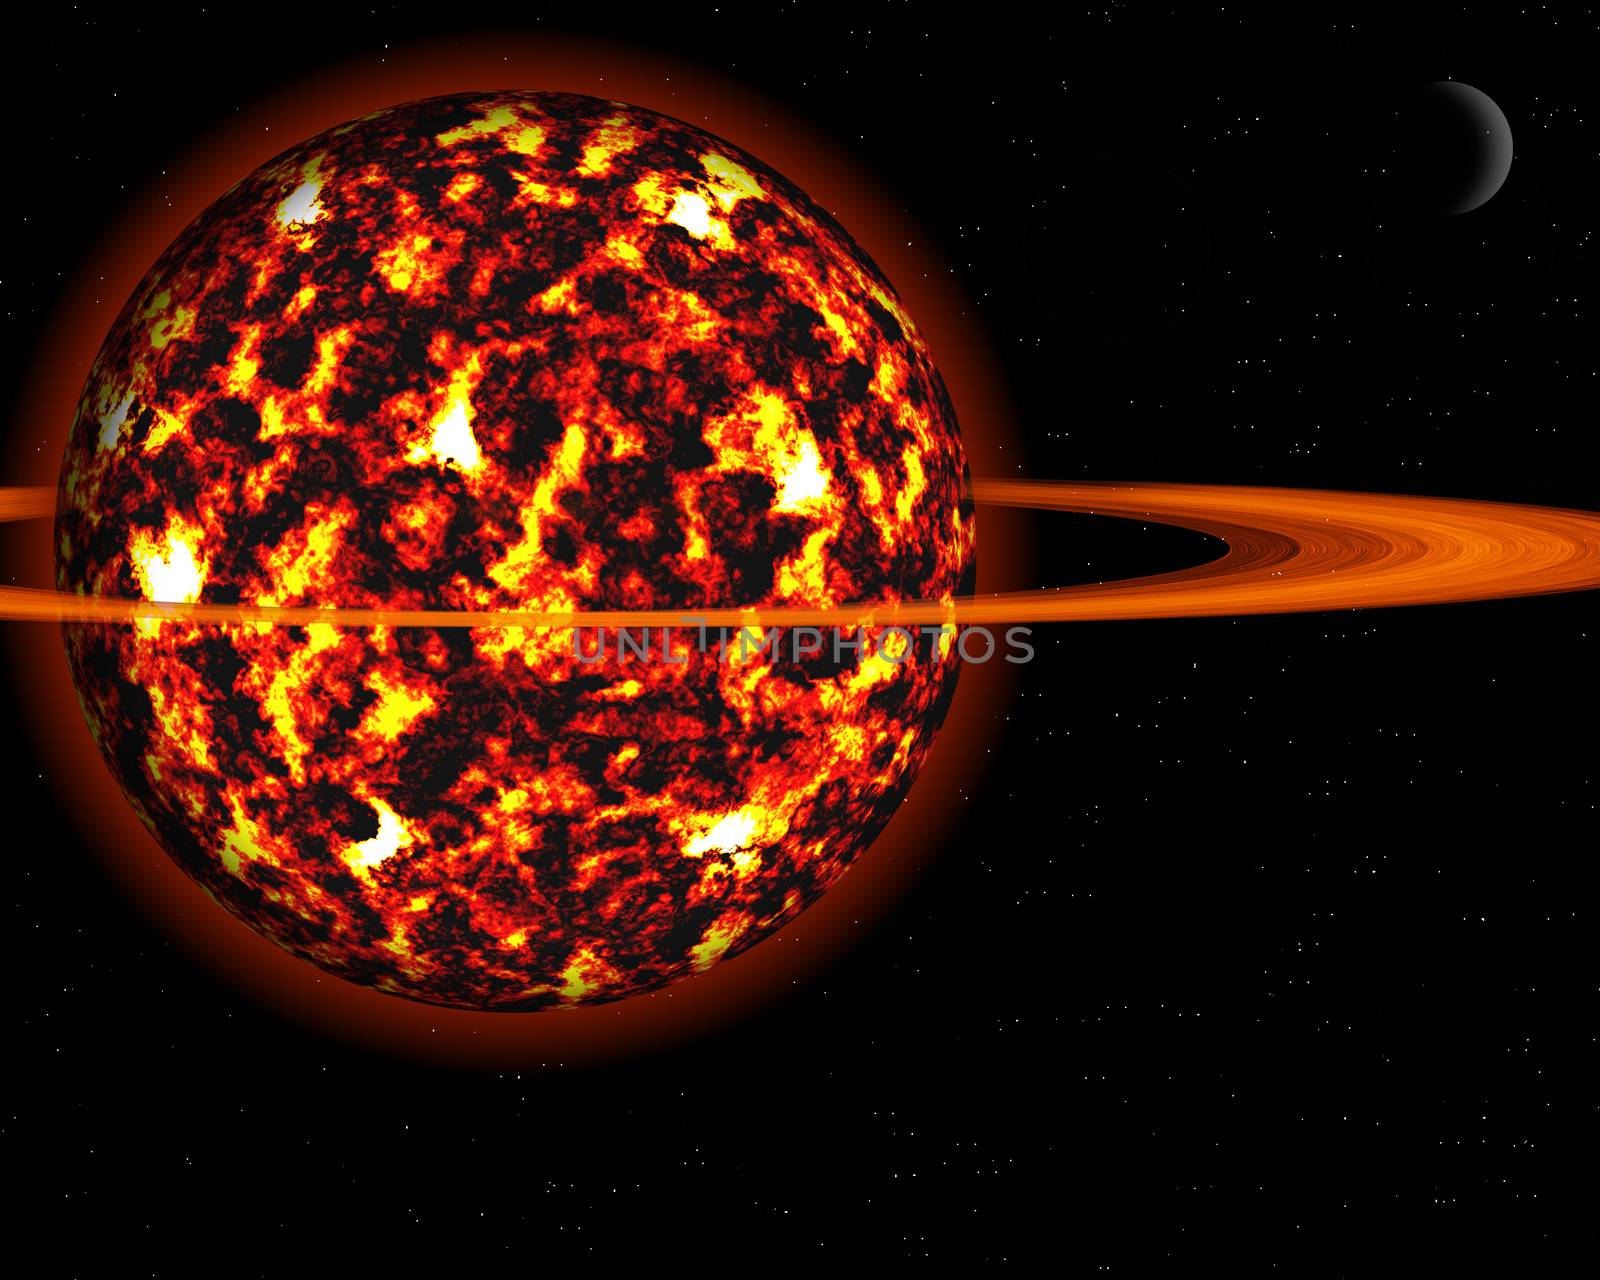 Burning Planet with Fiery Explosions, Thermal Winds and Swirling Turbulence